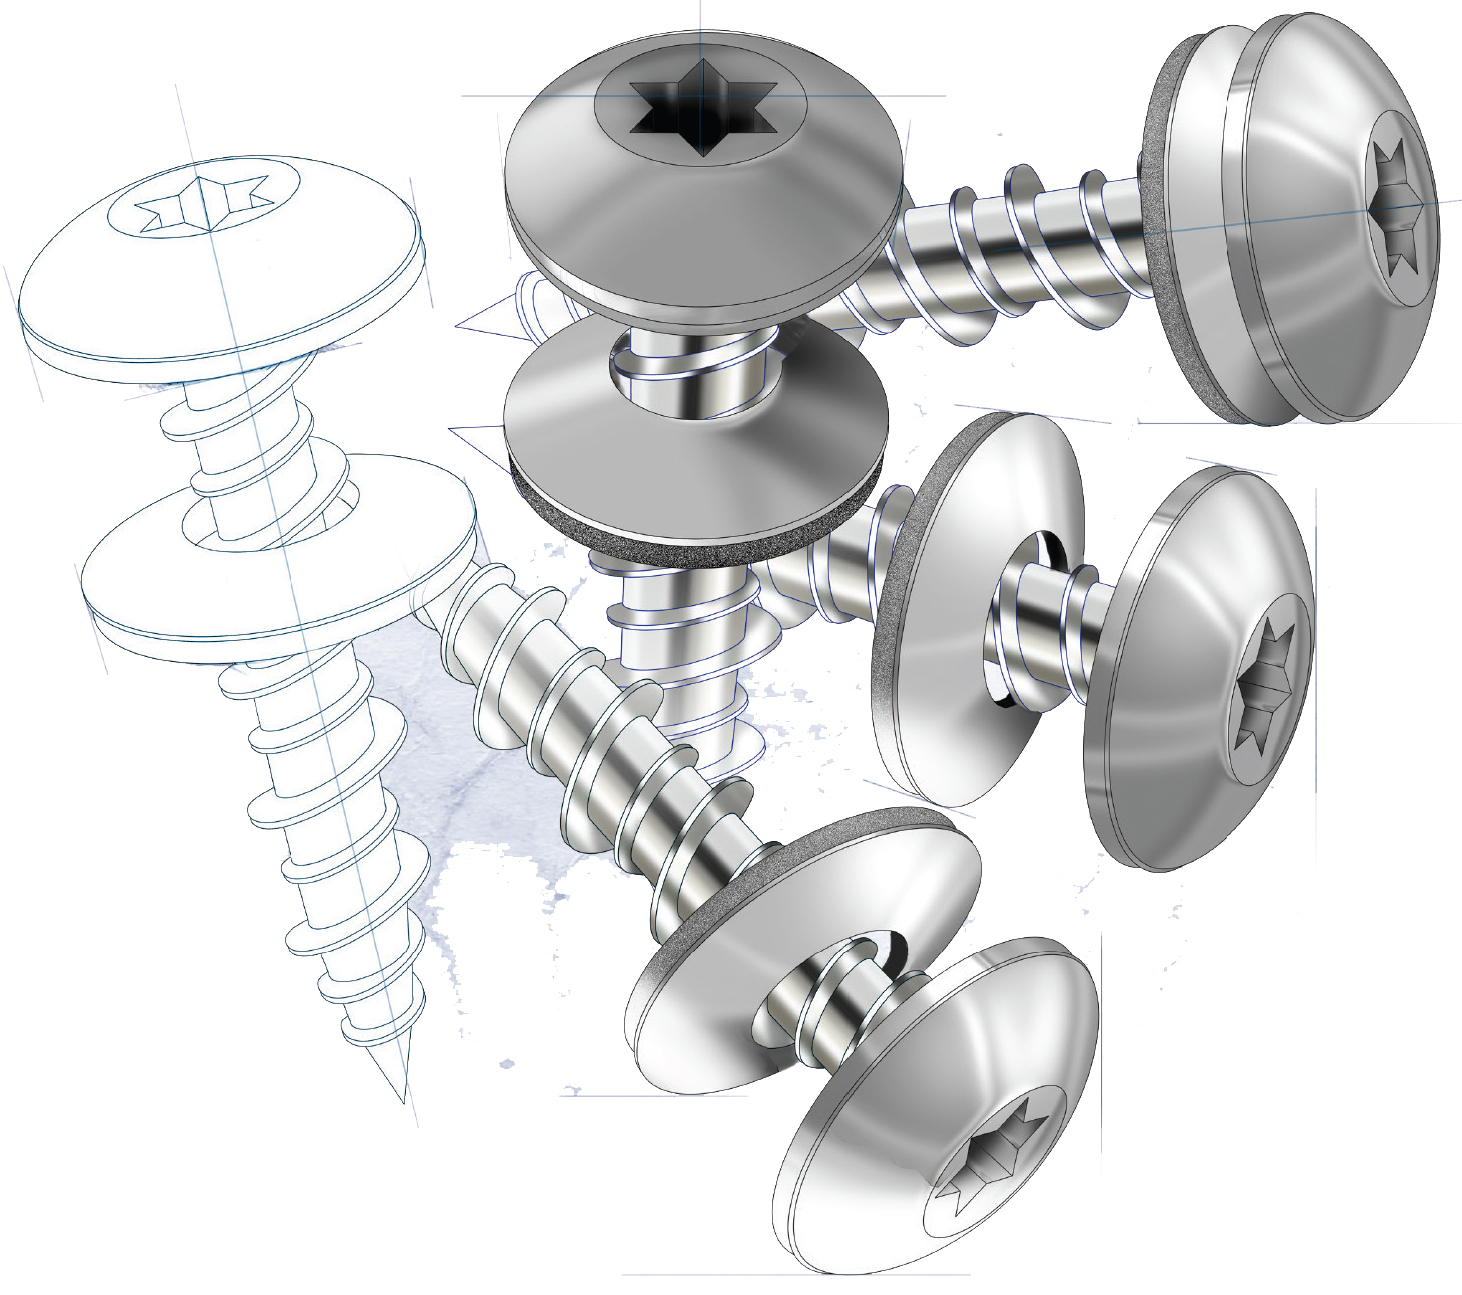 https://wiseconstruction.net/sites/wiseconstruction.net/assets/images/default/difference-fasteners.jpg